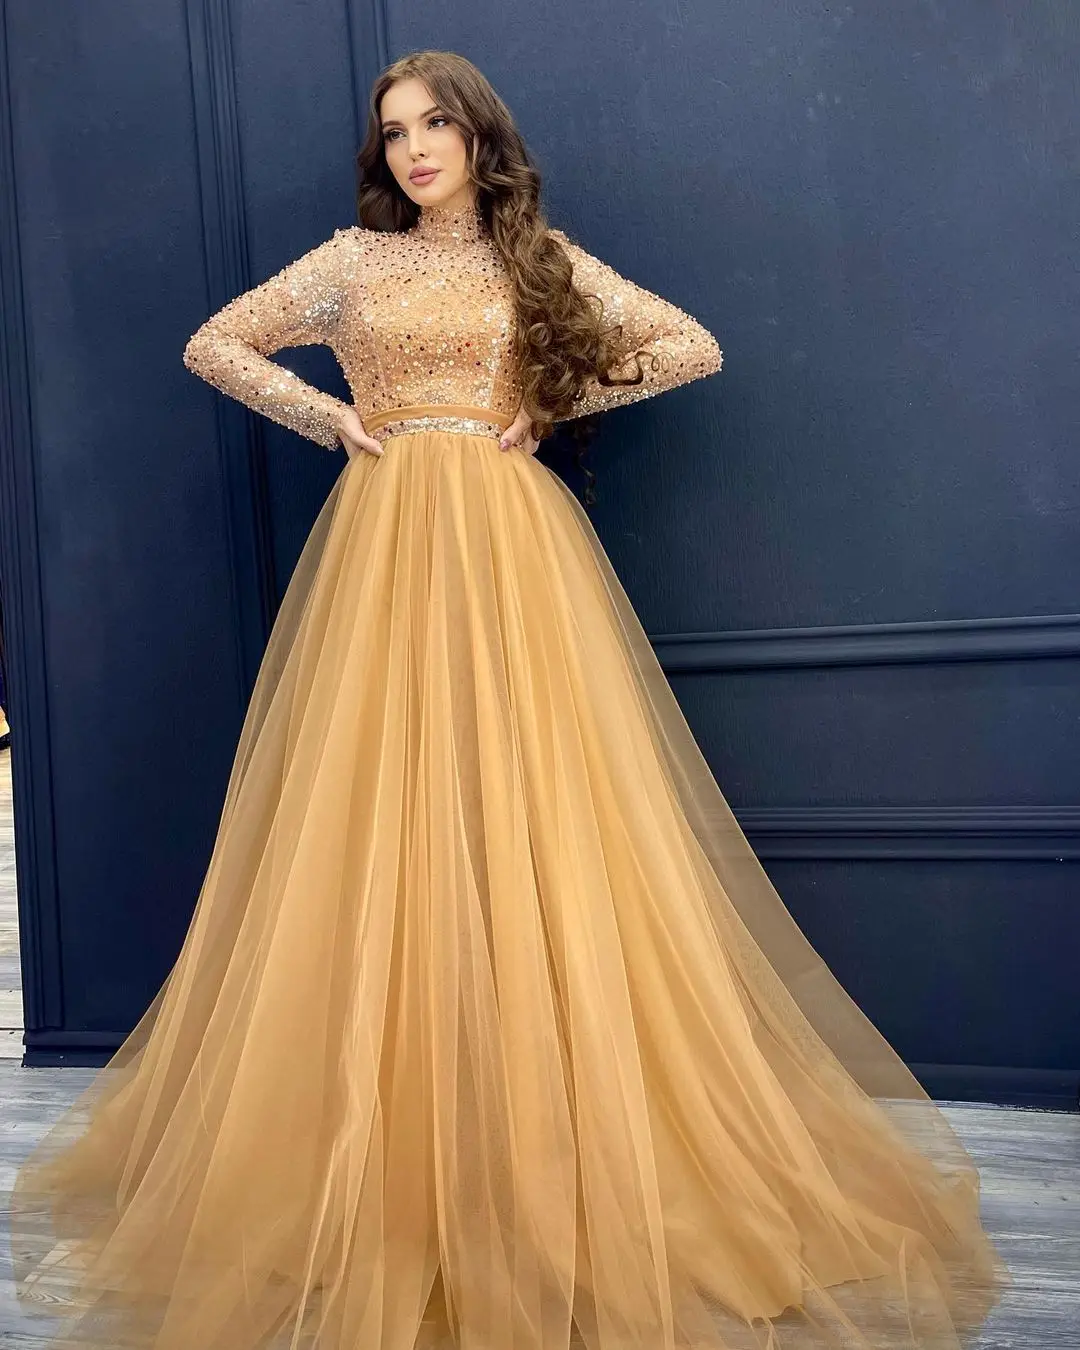 

Sayulita Sequins Top Dubai Women Wear High Collar Prom Dresses Long Sleeves A Line Tulle Bridal Gowns for Evening Saudi Arabia